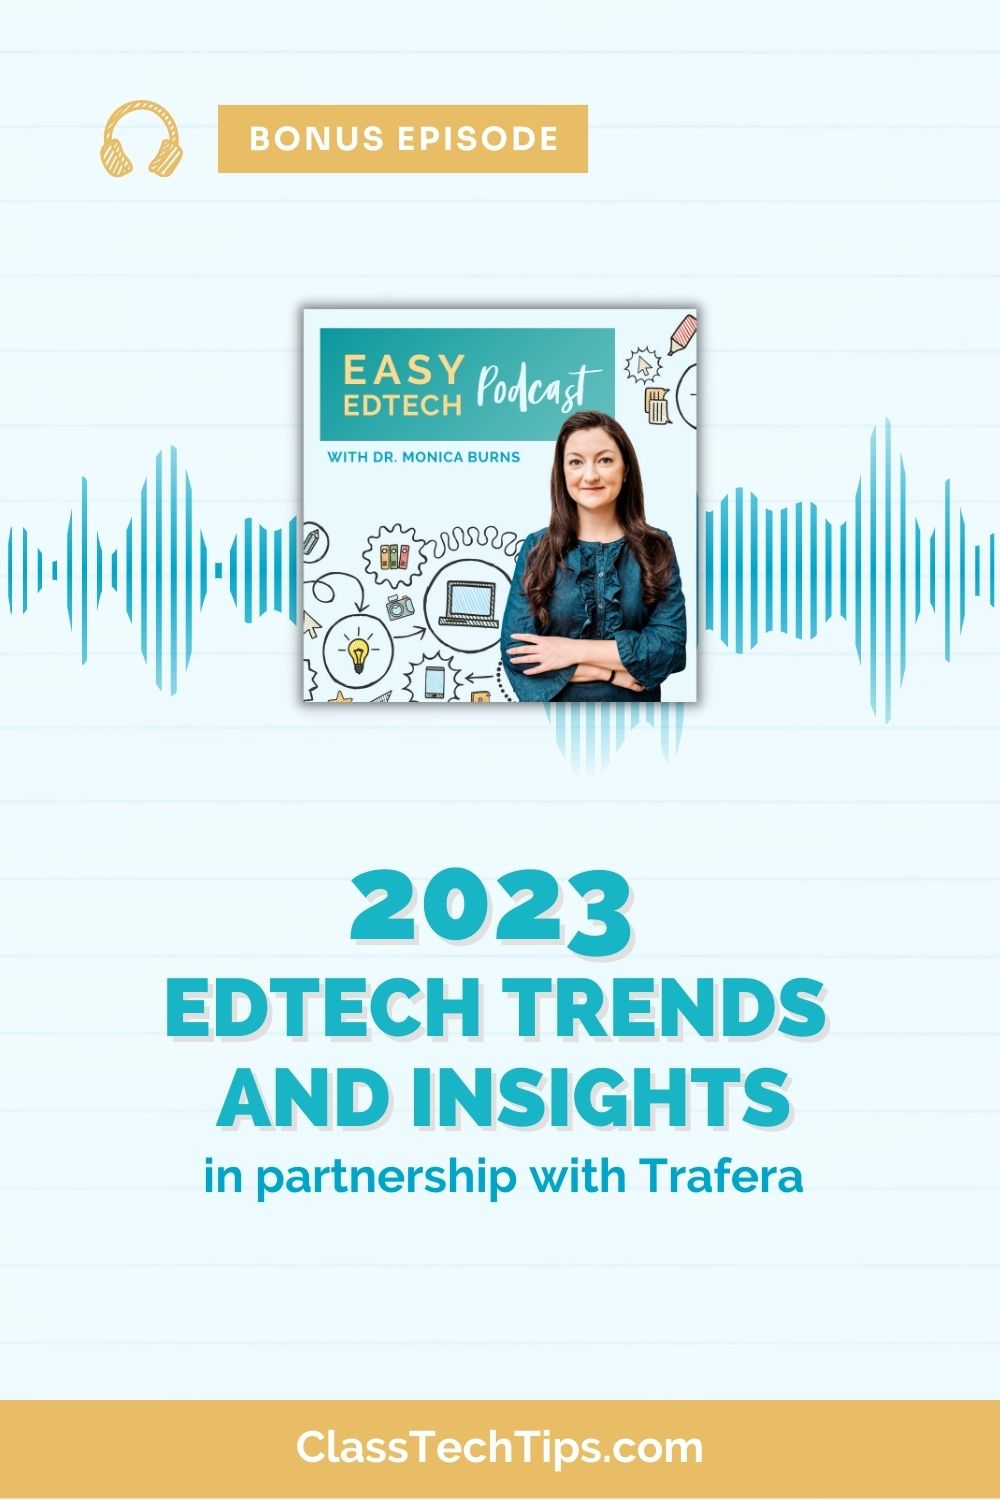 Scott Gill, CEO of Trafera, joins to chat about 2023 EdTech trends and insights, including how to support positive outcomes for students.